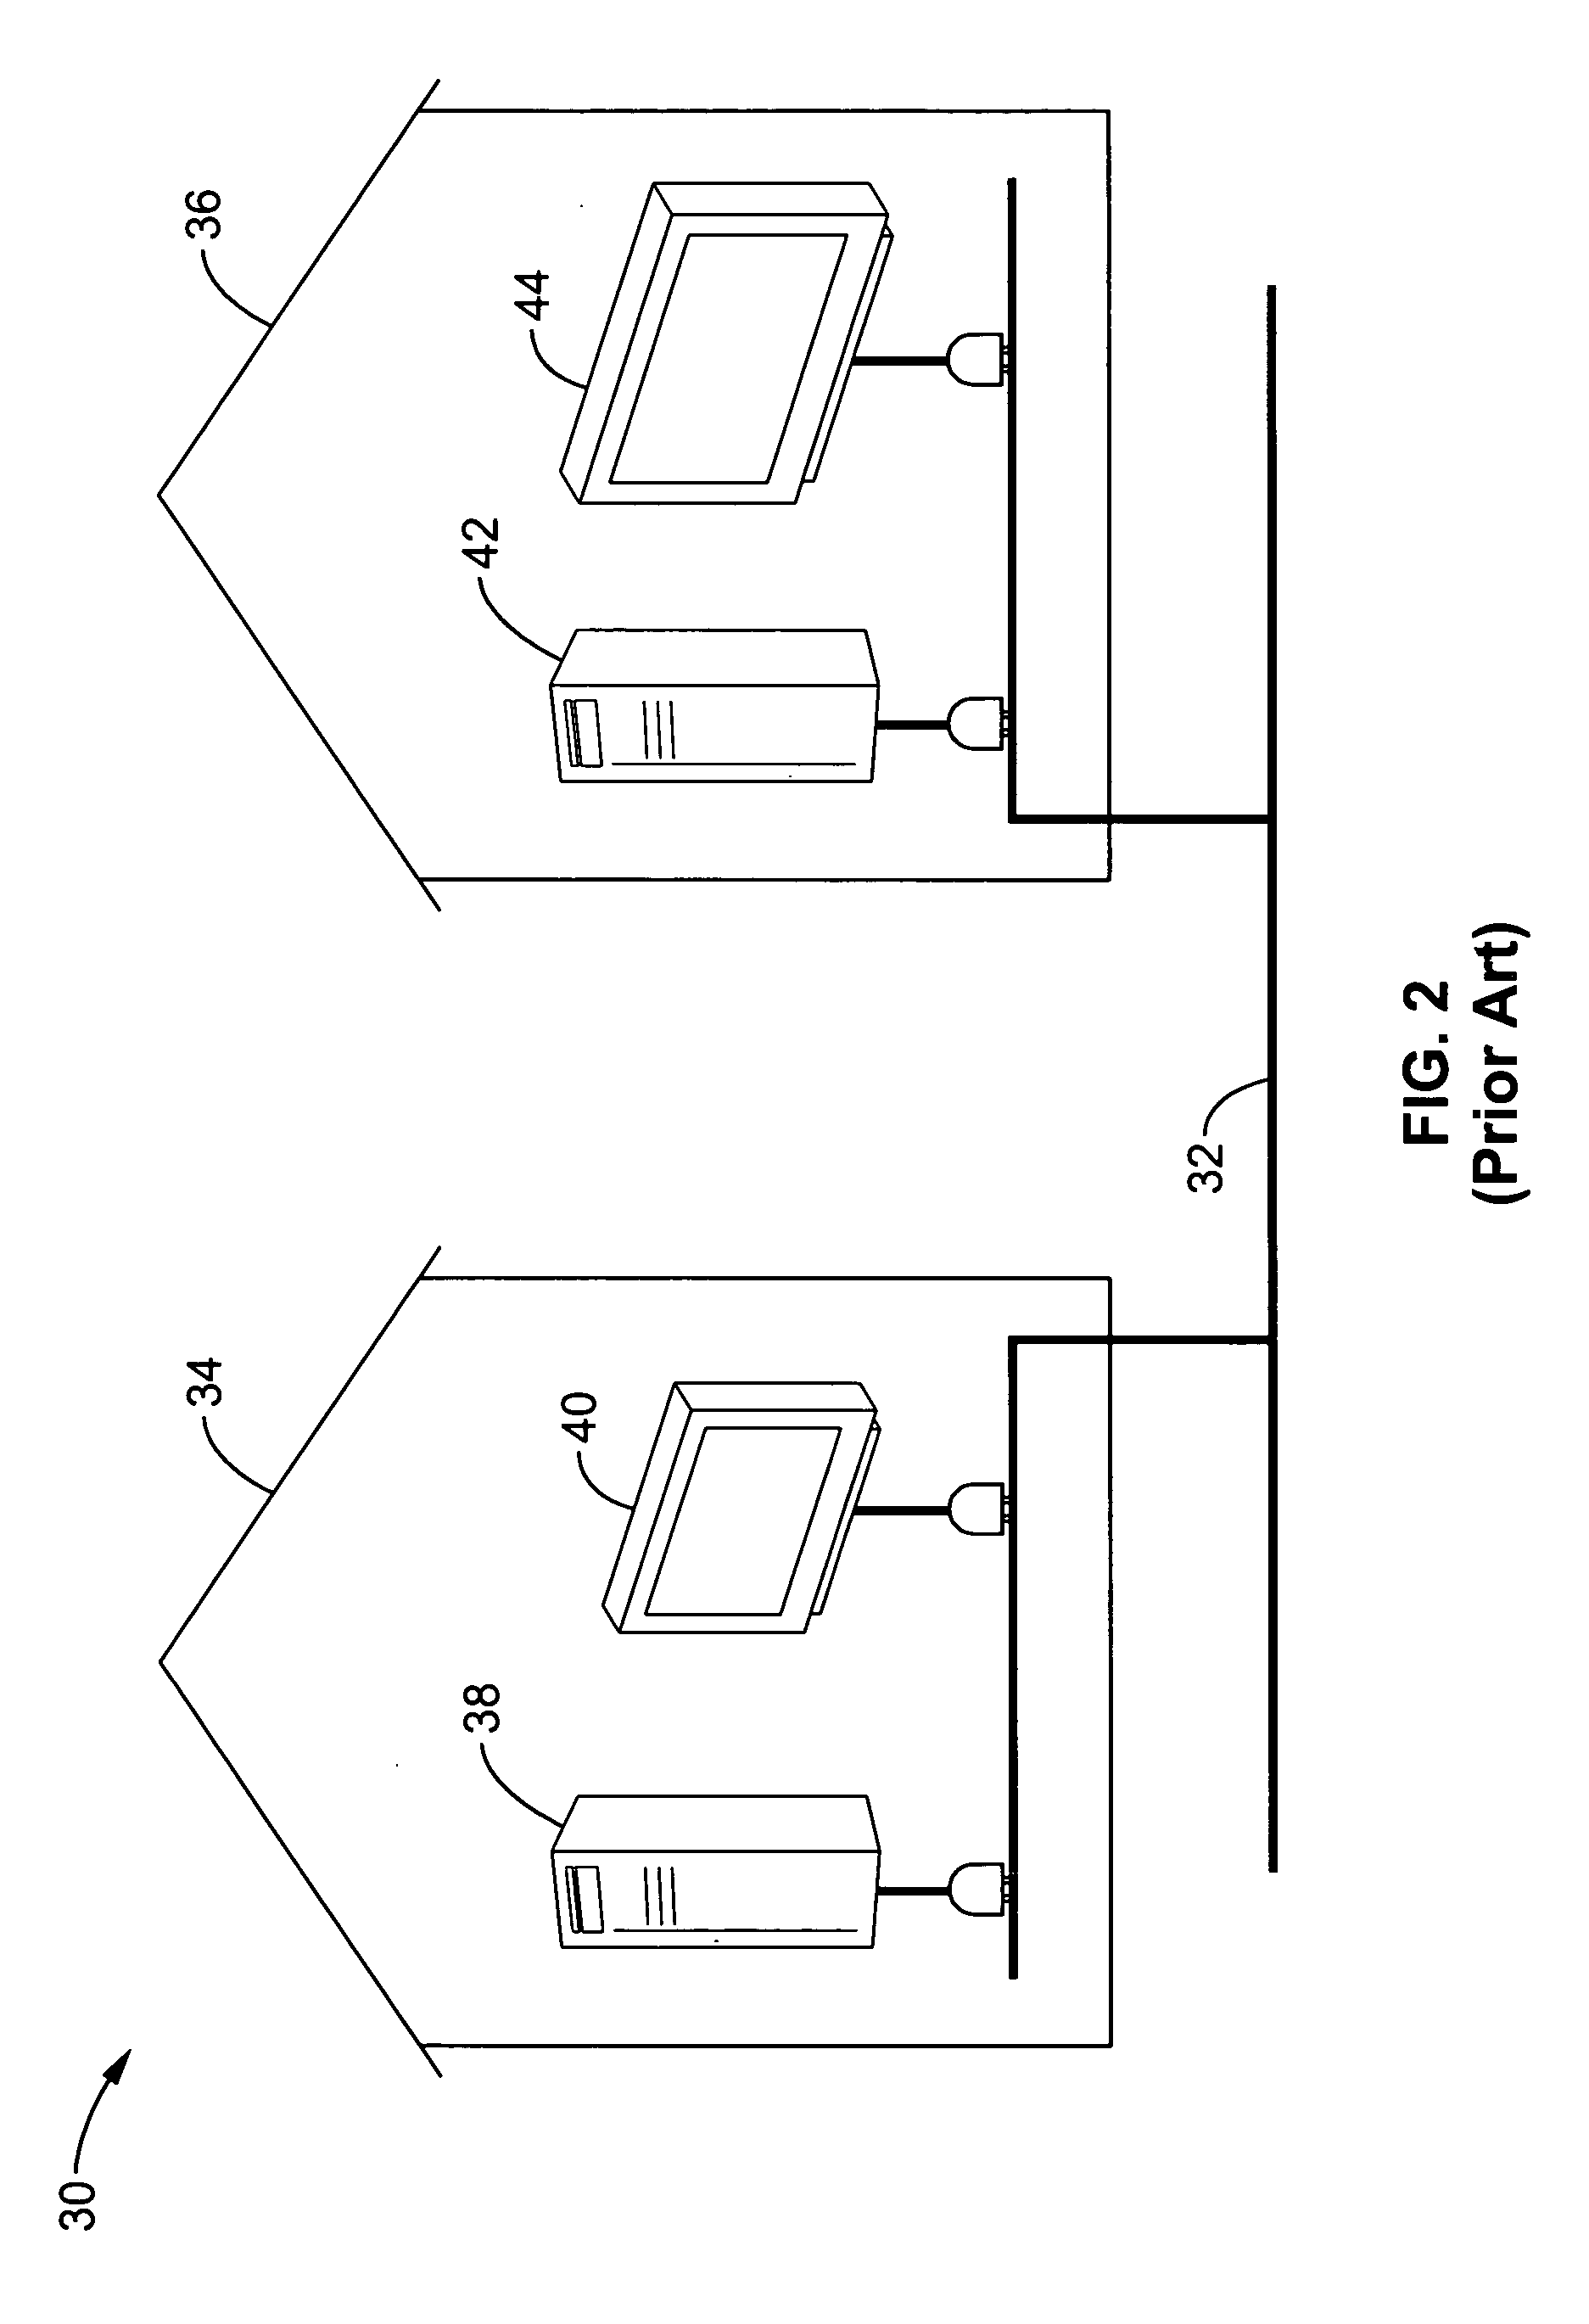 System and method for authenticating/registering network device in power line communication (PLC)